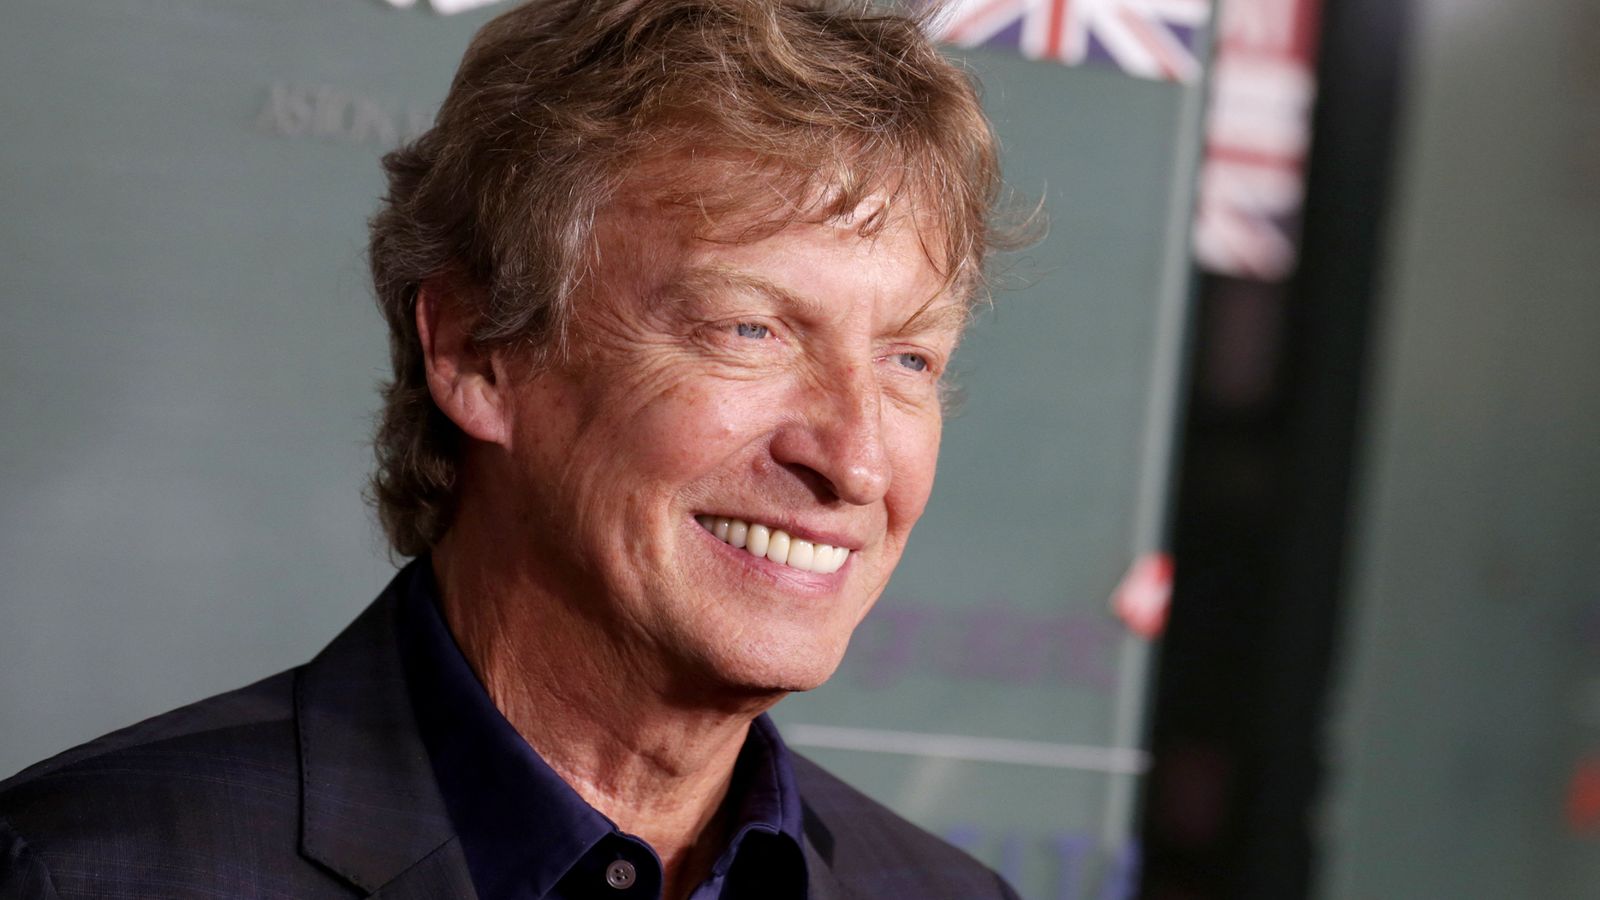 Nigel Lythgoe steps back as talent show judge amid sexual assault allegations